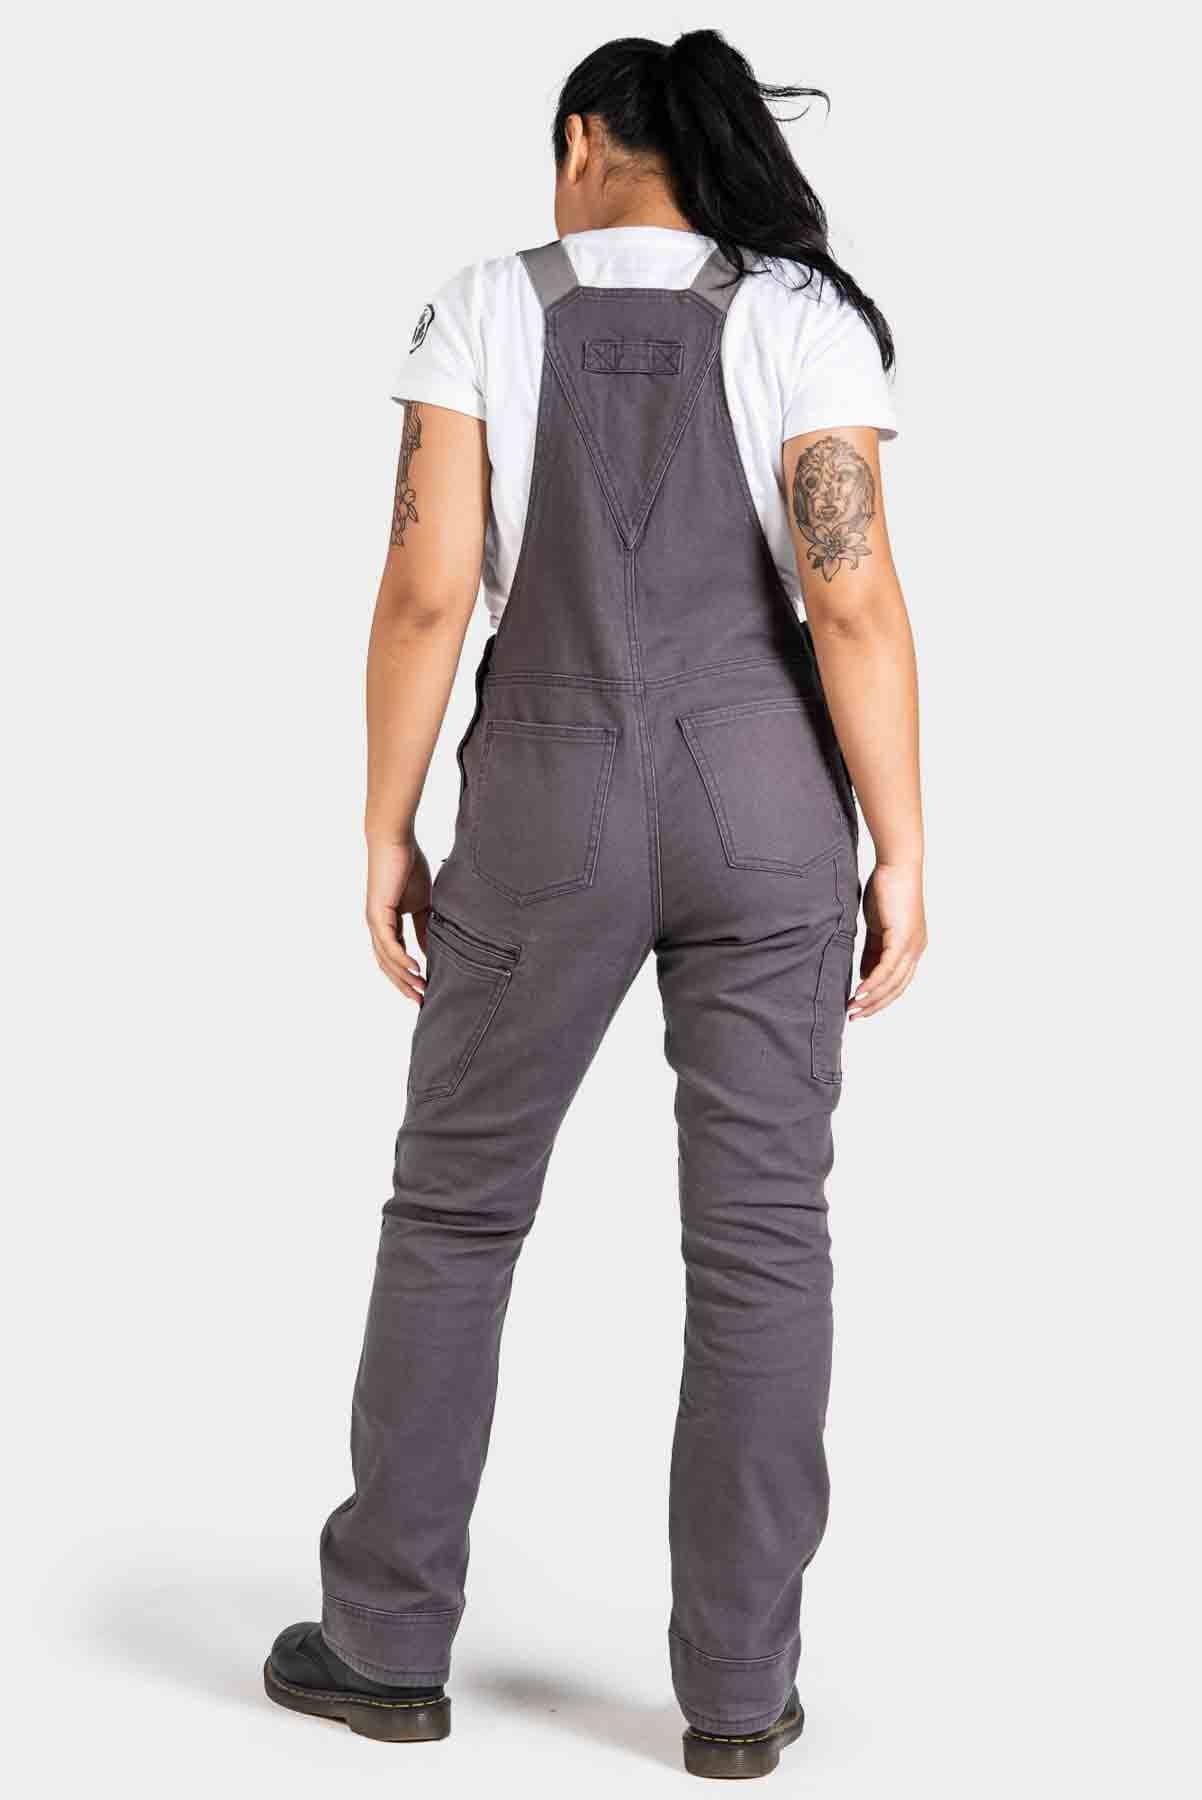 Freshley Overalls For Women in Grey Canvas Work Pants Dovetail Workwear